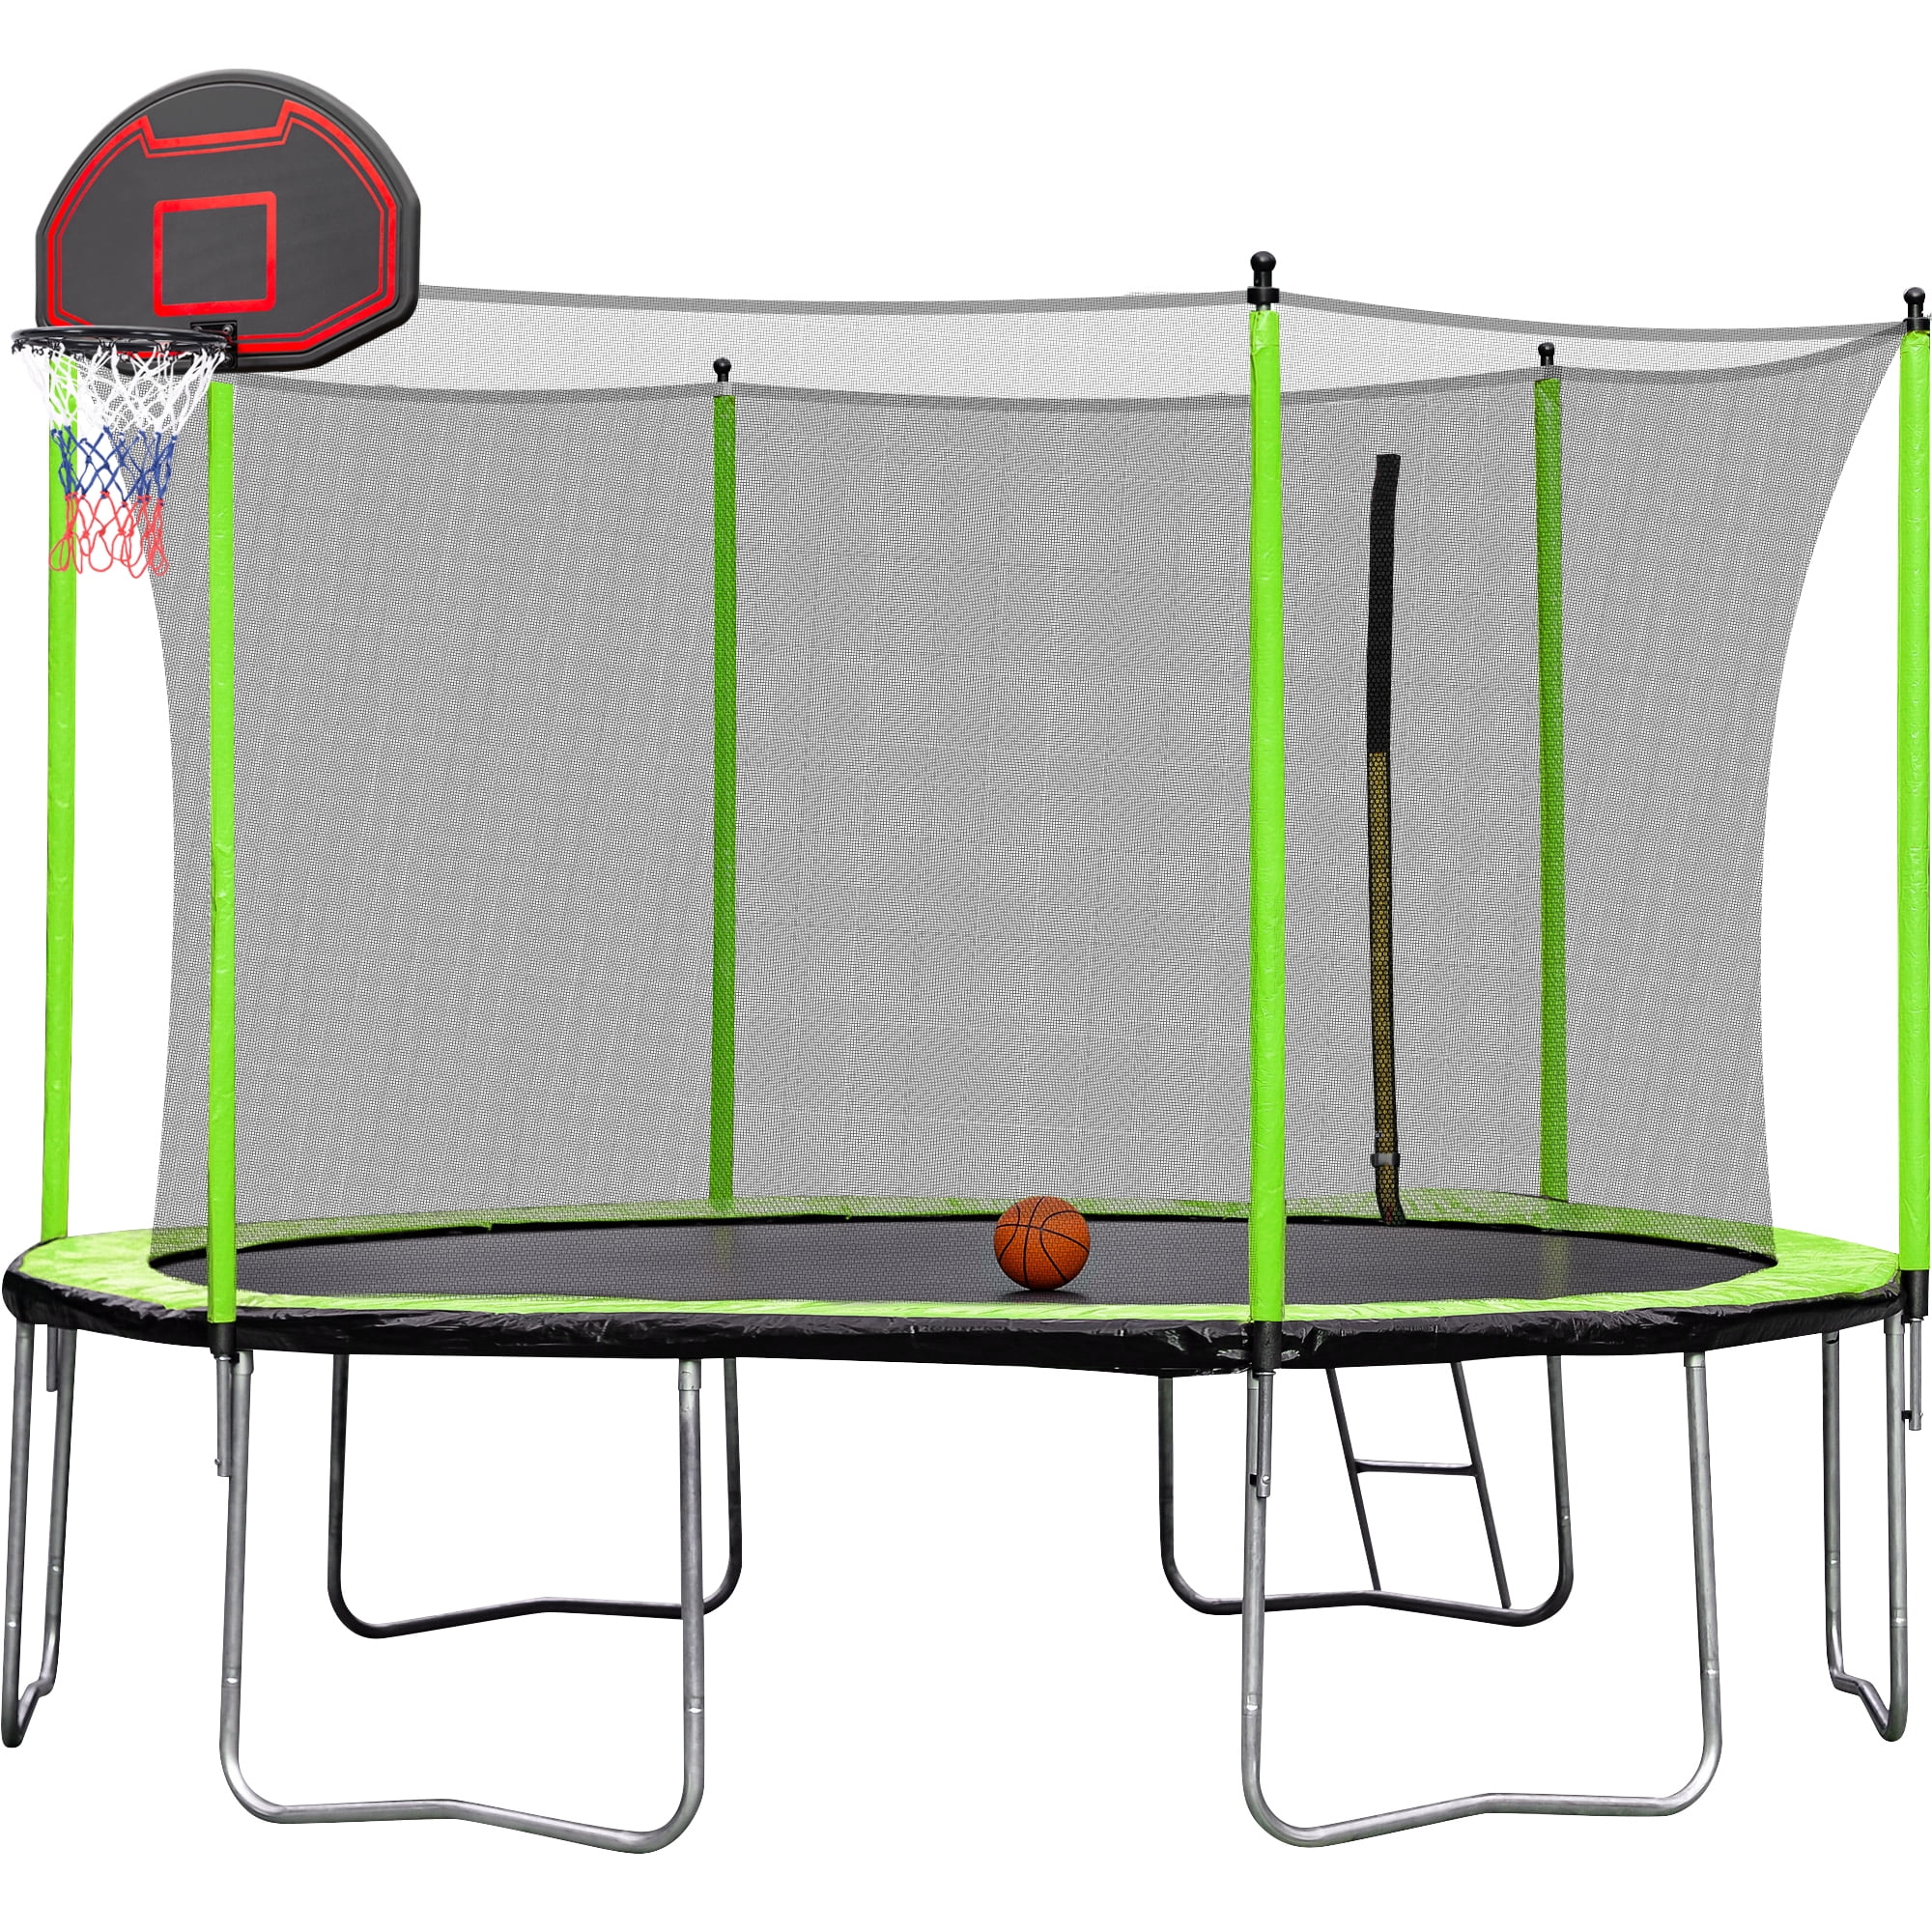 moobody 14FT Trampoline with Basketball Hoop Inflator and Ladder(Inner Safety Enclosure) Green